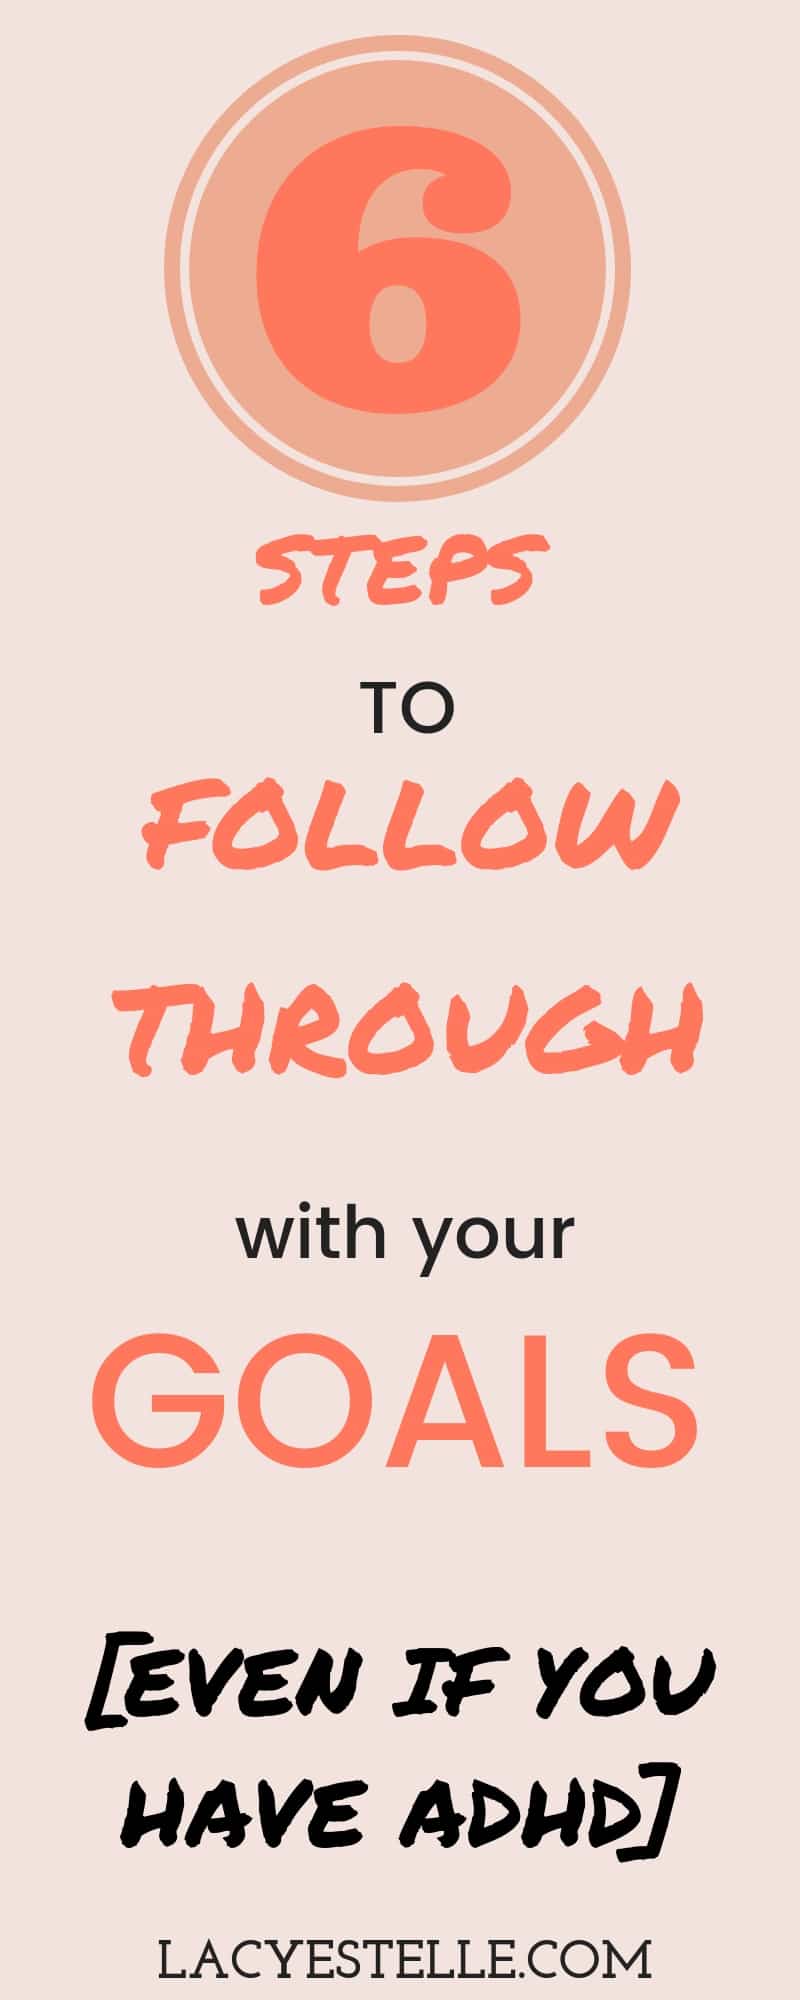 how to follow through on your goals, despite ADHD. Meet your goals even with mental illness. Follow through. Lacy Estelle, Mothering the Storm